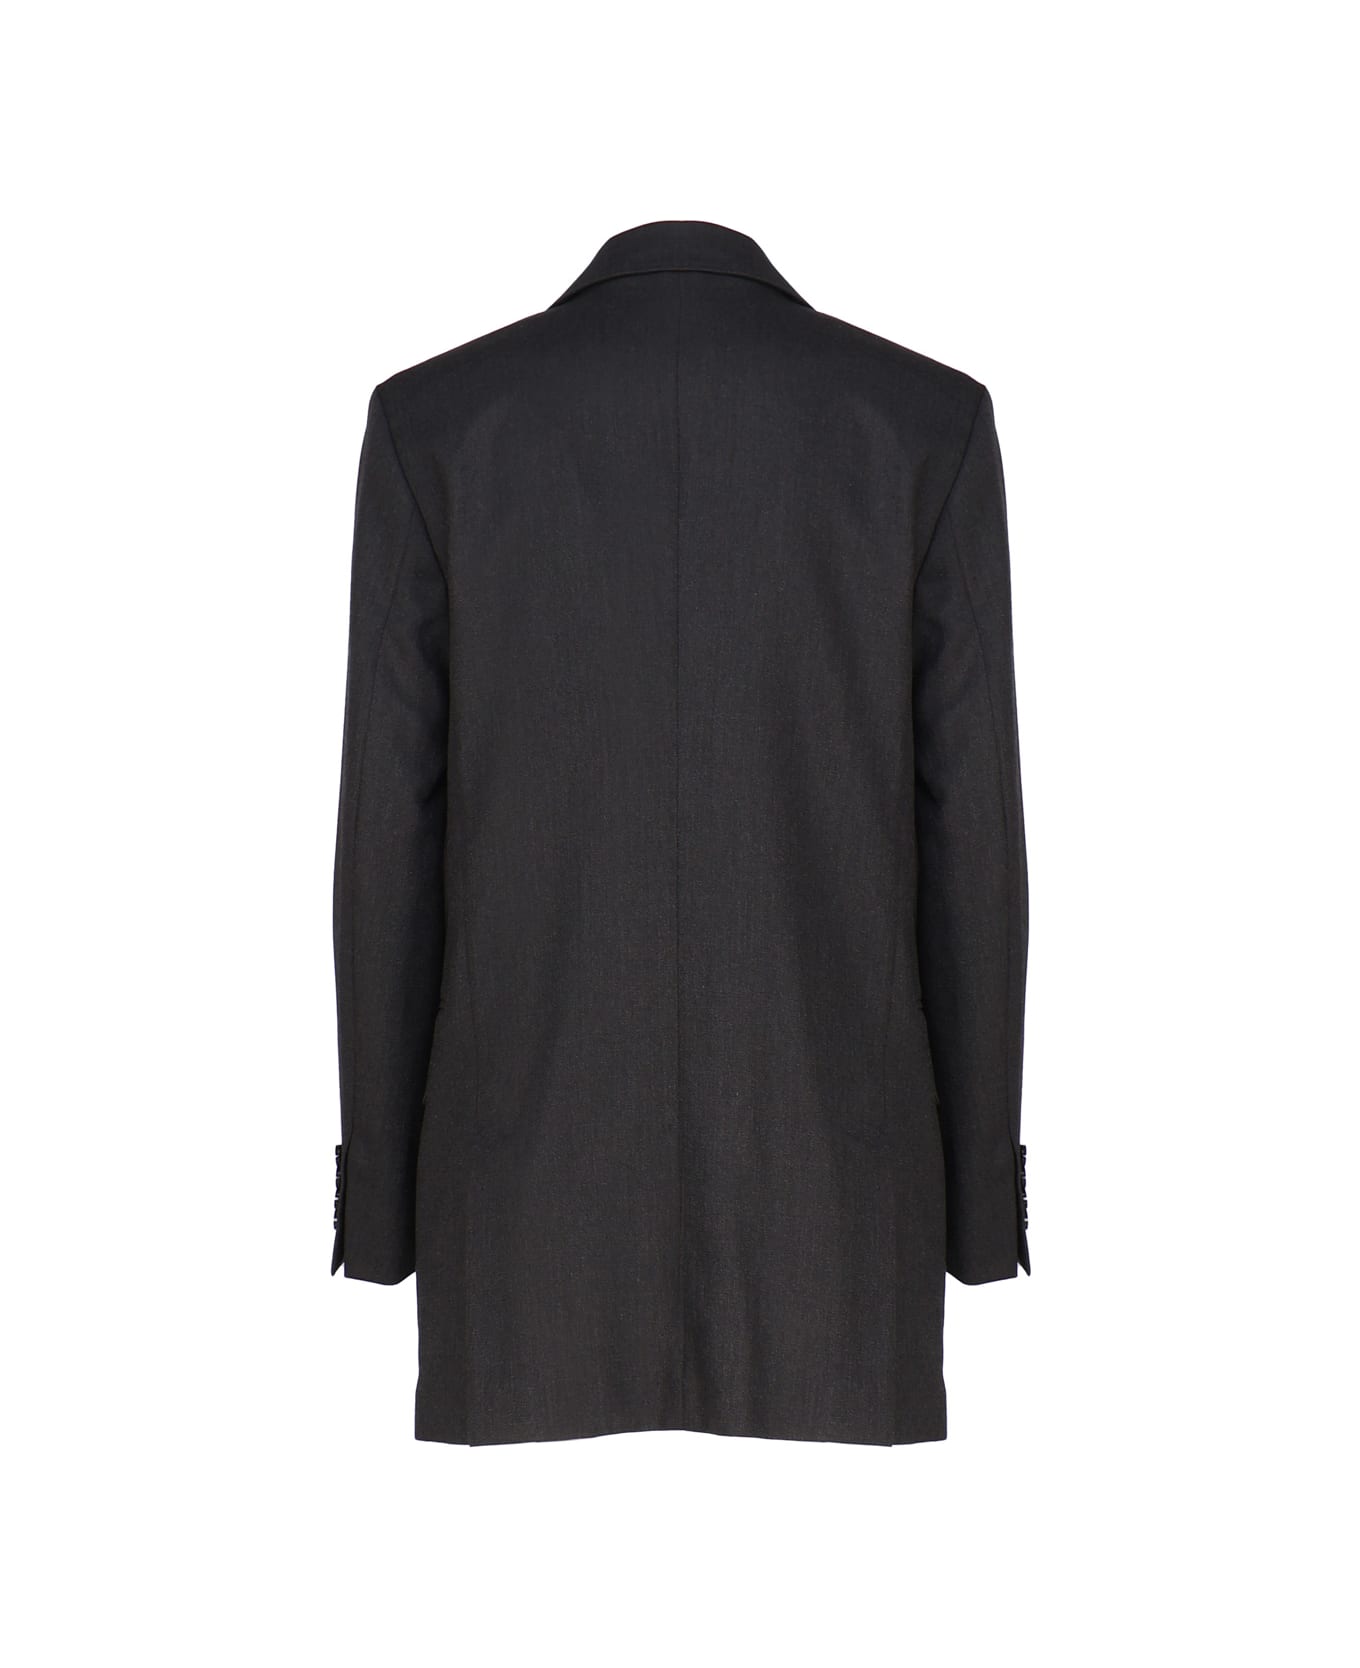 Max Mara Double Breasted Blazer In Wool Blend - Anthracite